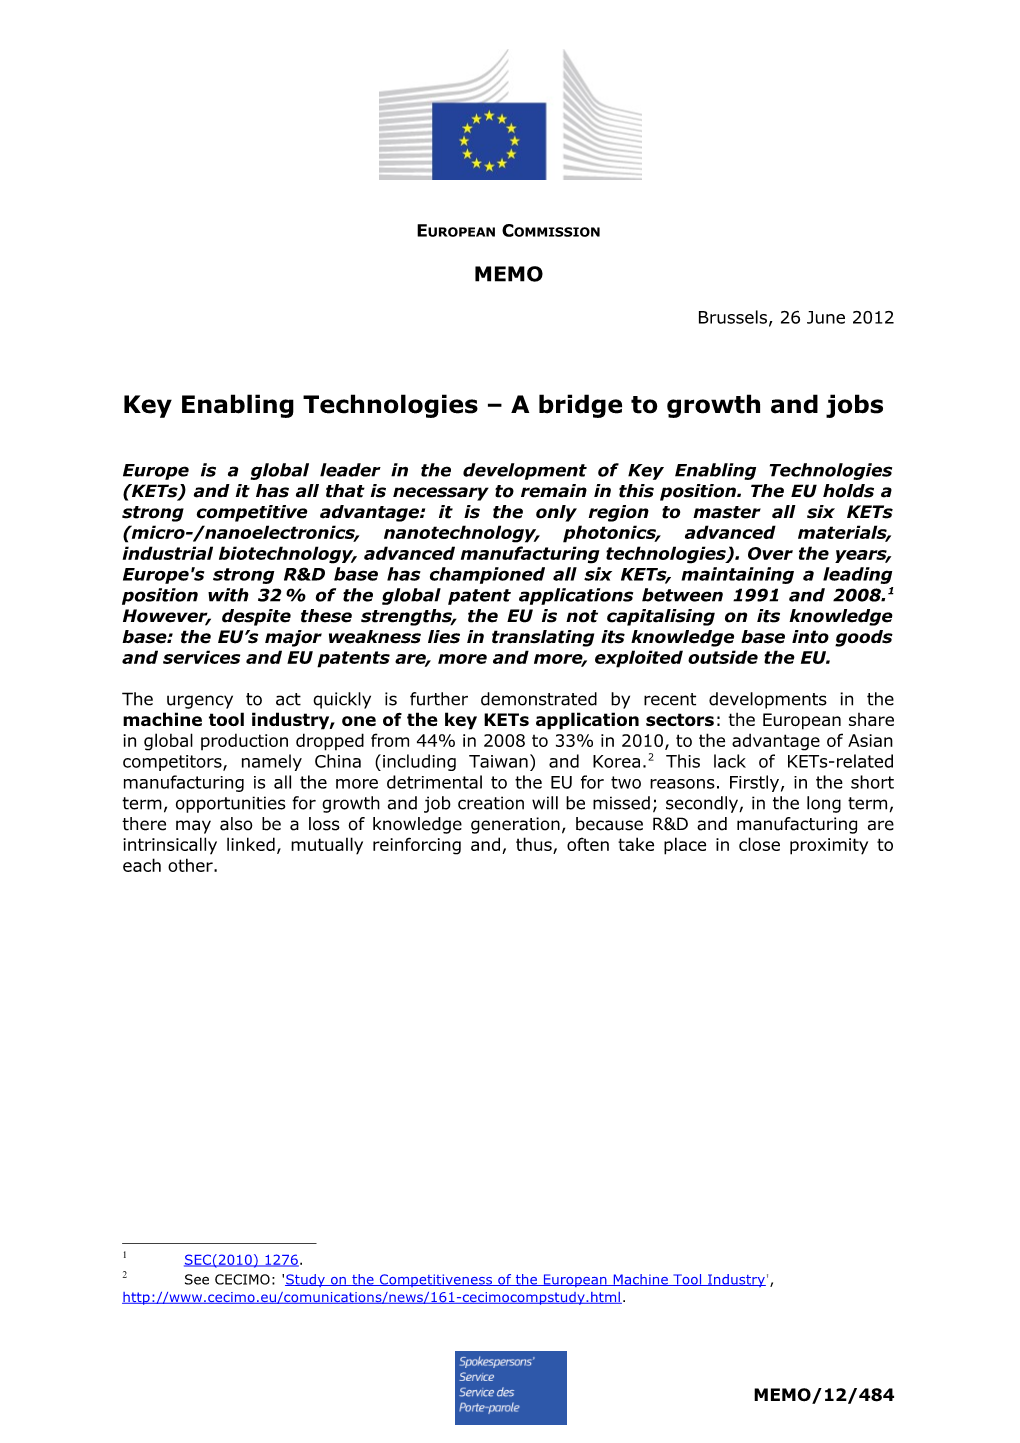 Key Enabling Technologies a Bridge to Growth and Jobs